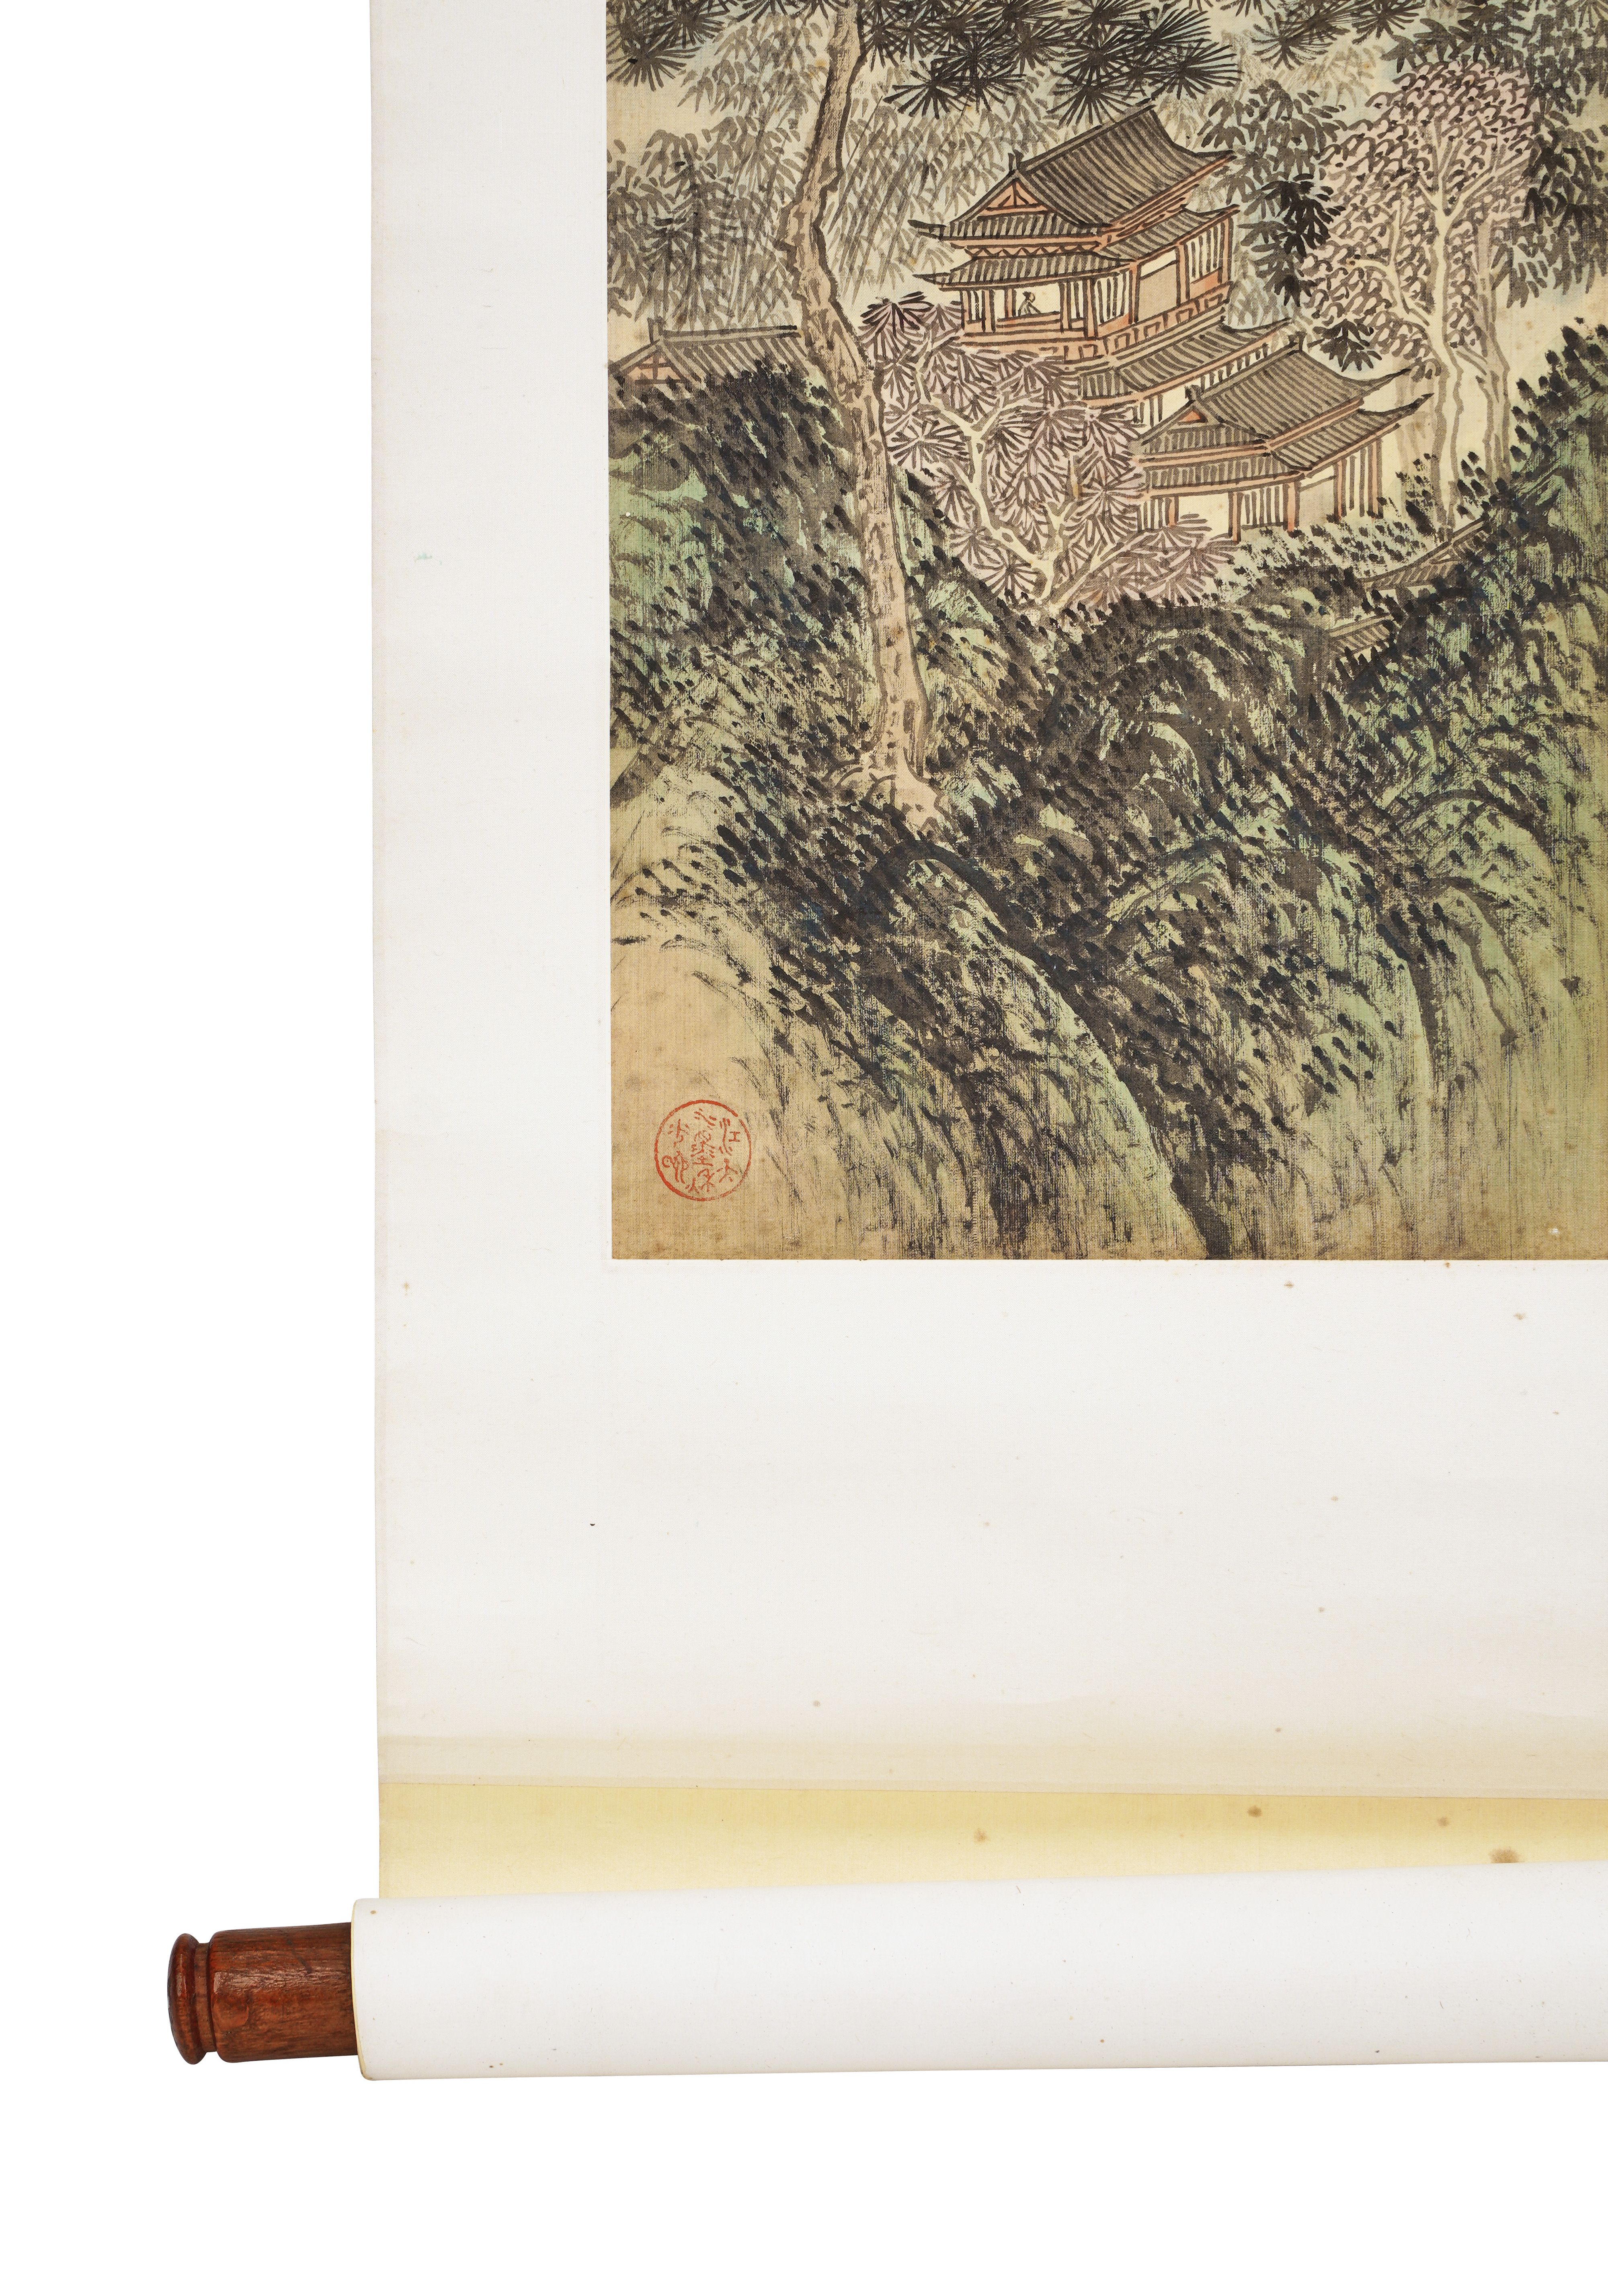 PU RU (1896-1963) A CHINESE LANDSCAPE SCROLL COMMISSIONED FOR THE LAST EMPEROR - Image 5 of 6